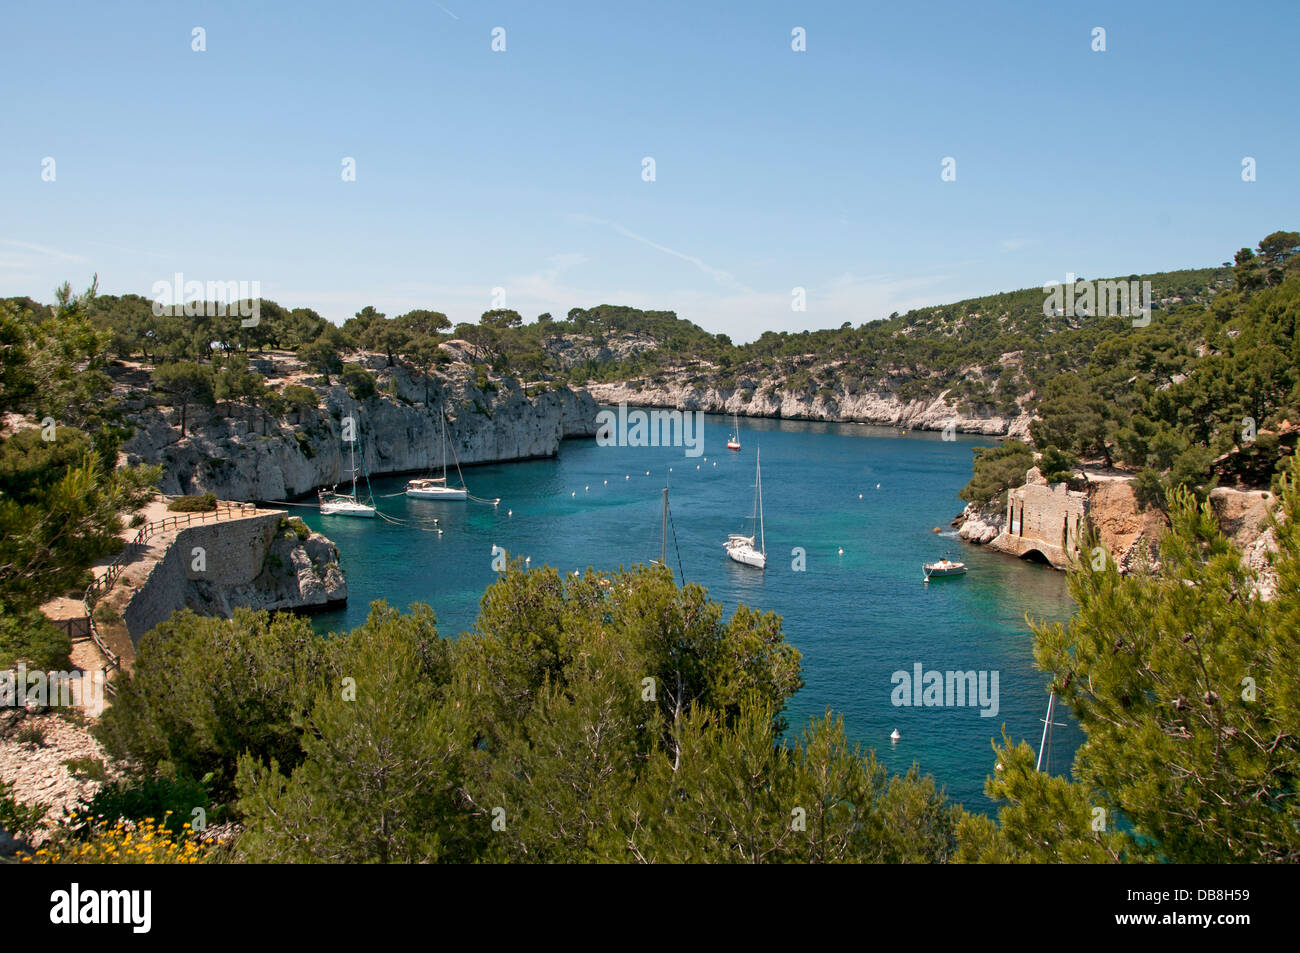 Provence Calanques near Cassis French Riviera France Boat Port Harbor Sea Stock Photo